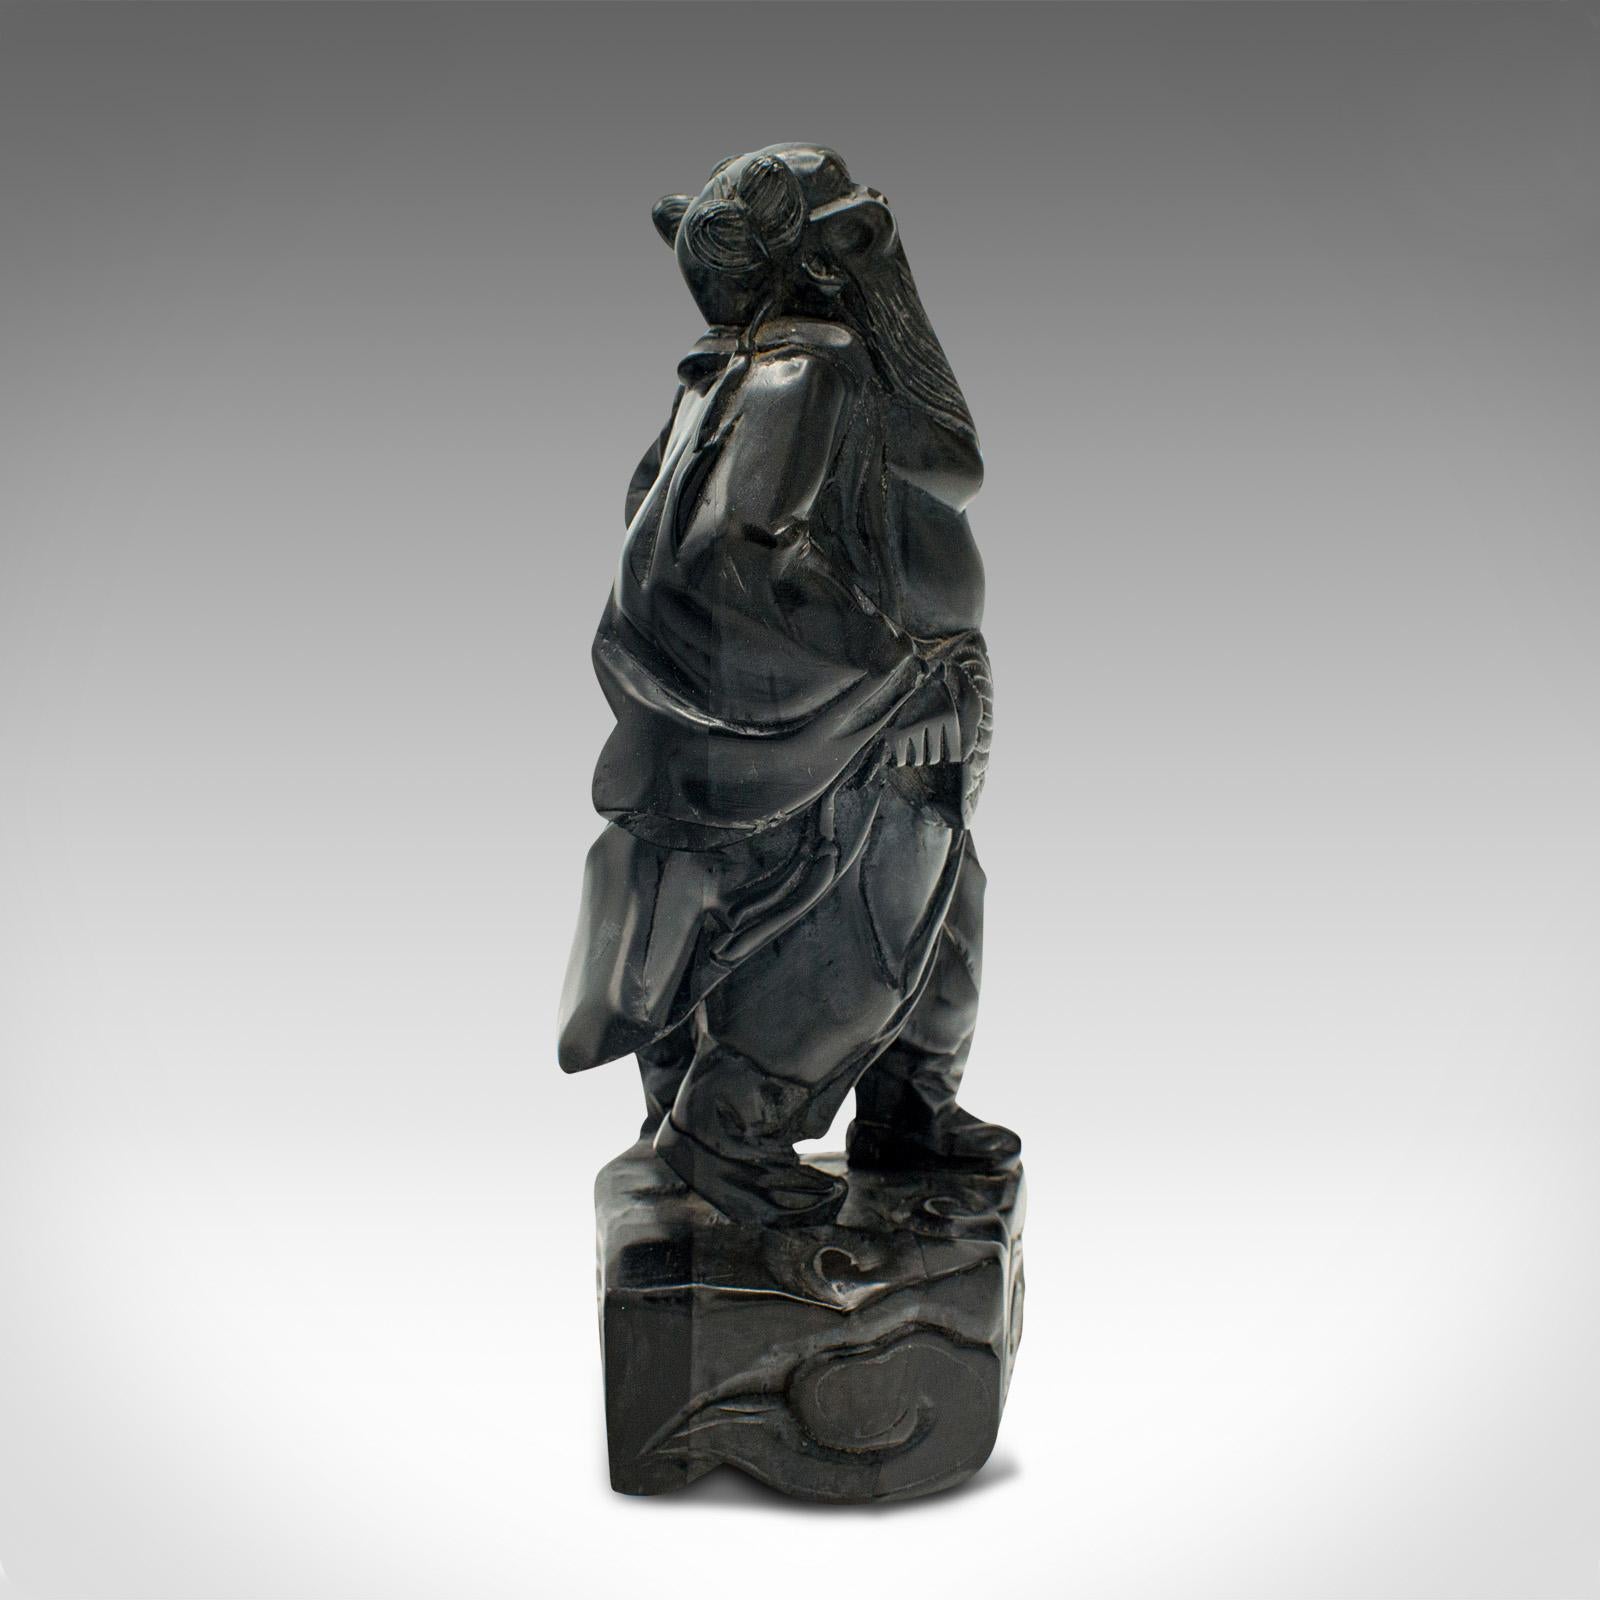 Small Vintage Carved Oriental Figure, Chinese, Hand Carved, Black Onyx, Art Deco In Good Condition For Sale In Hele, Devon, GB